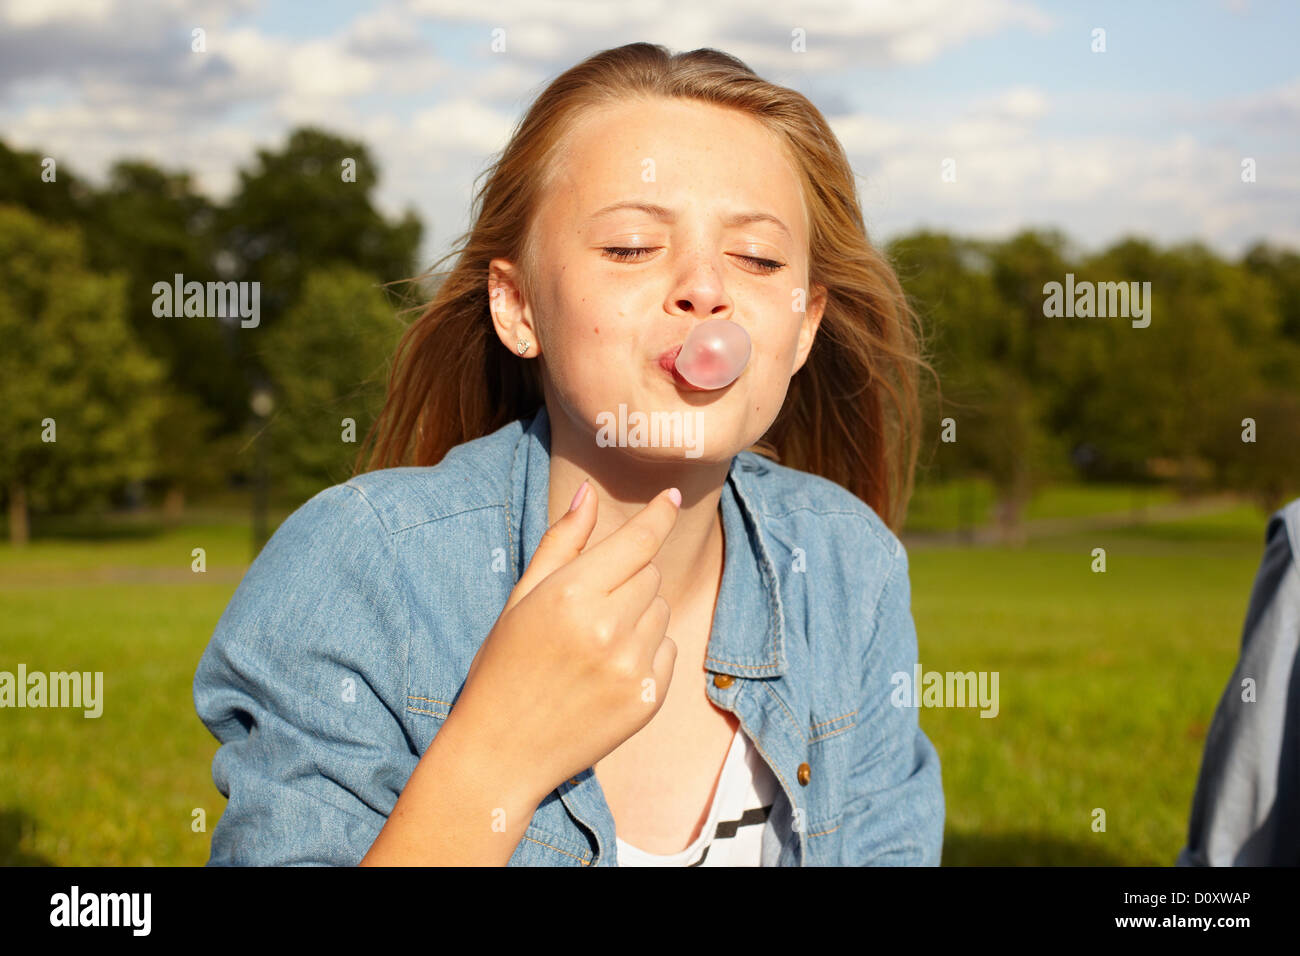 Teenage girl in park, blowing bubble gum Stock Photo